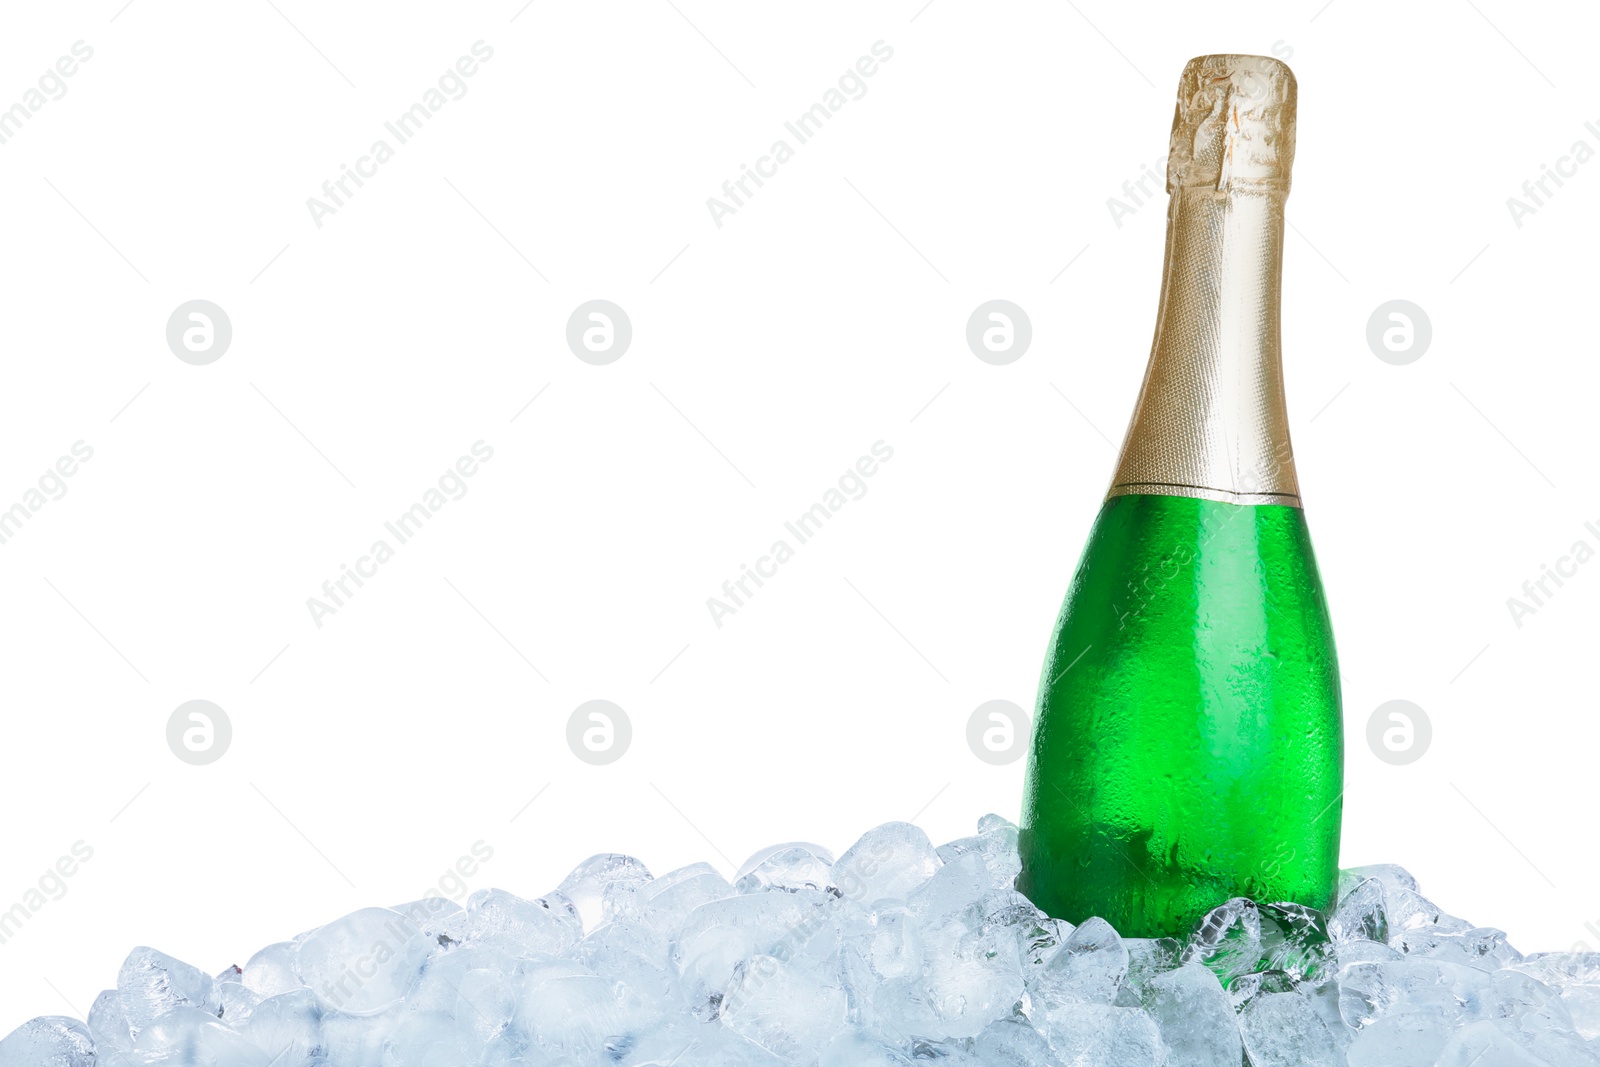 Photo of Ice cubes and bottle of champagne on white background